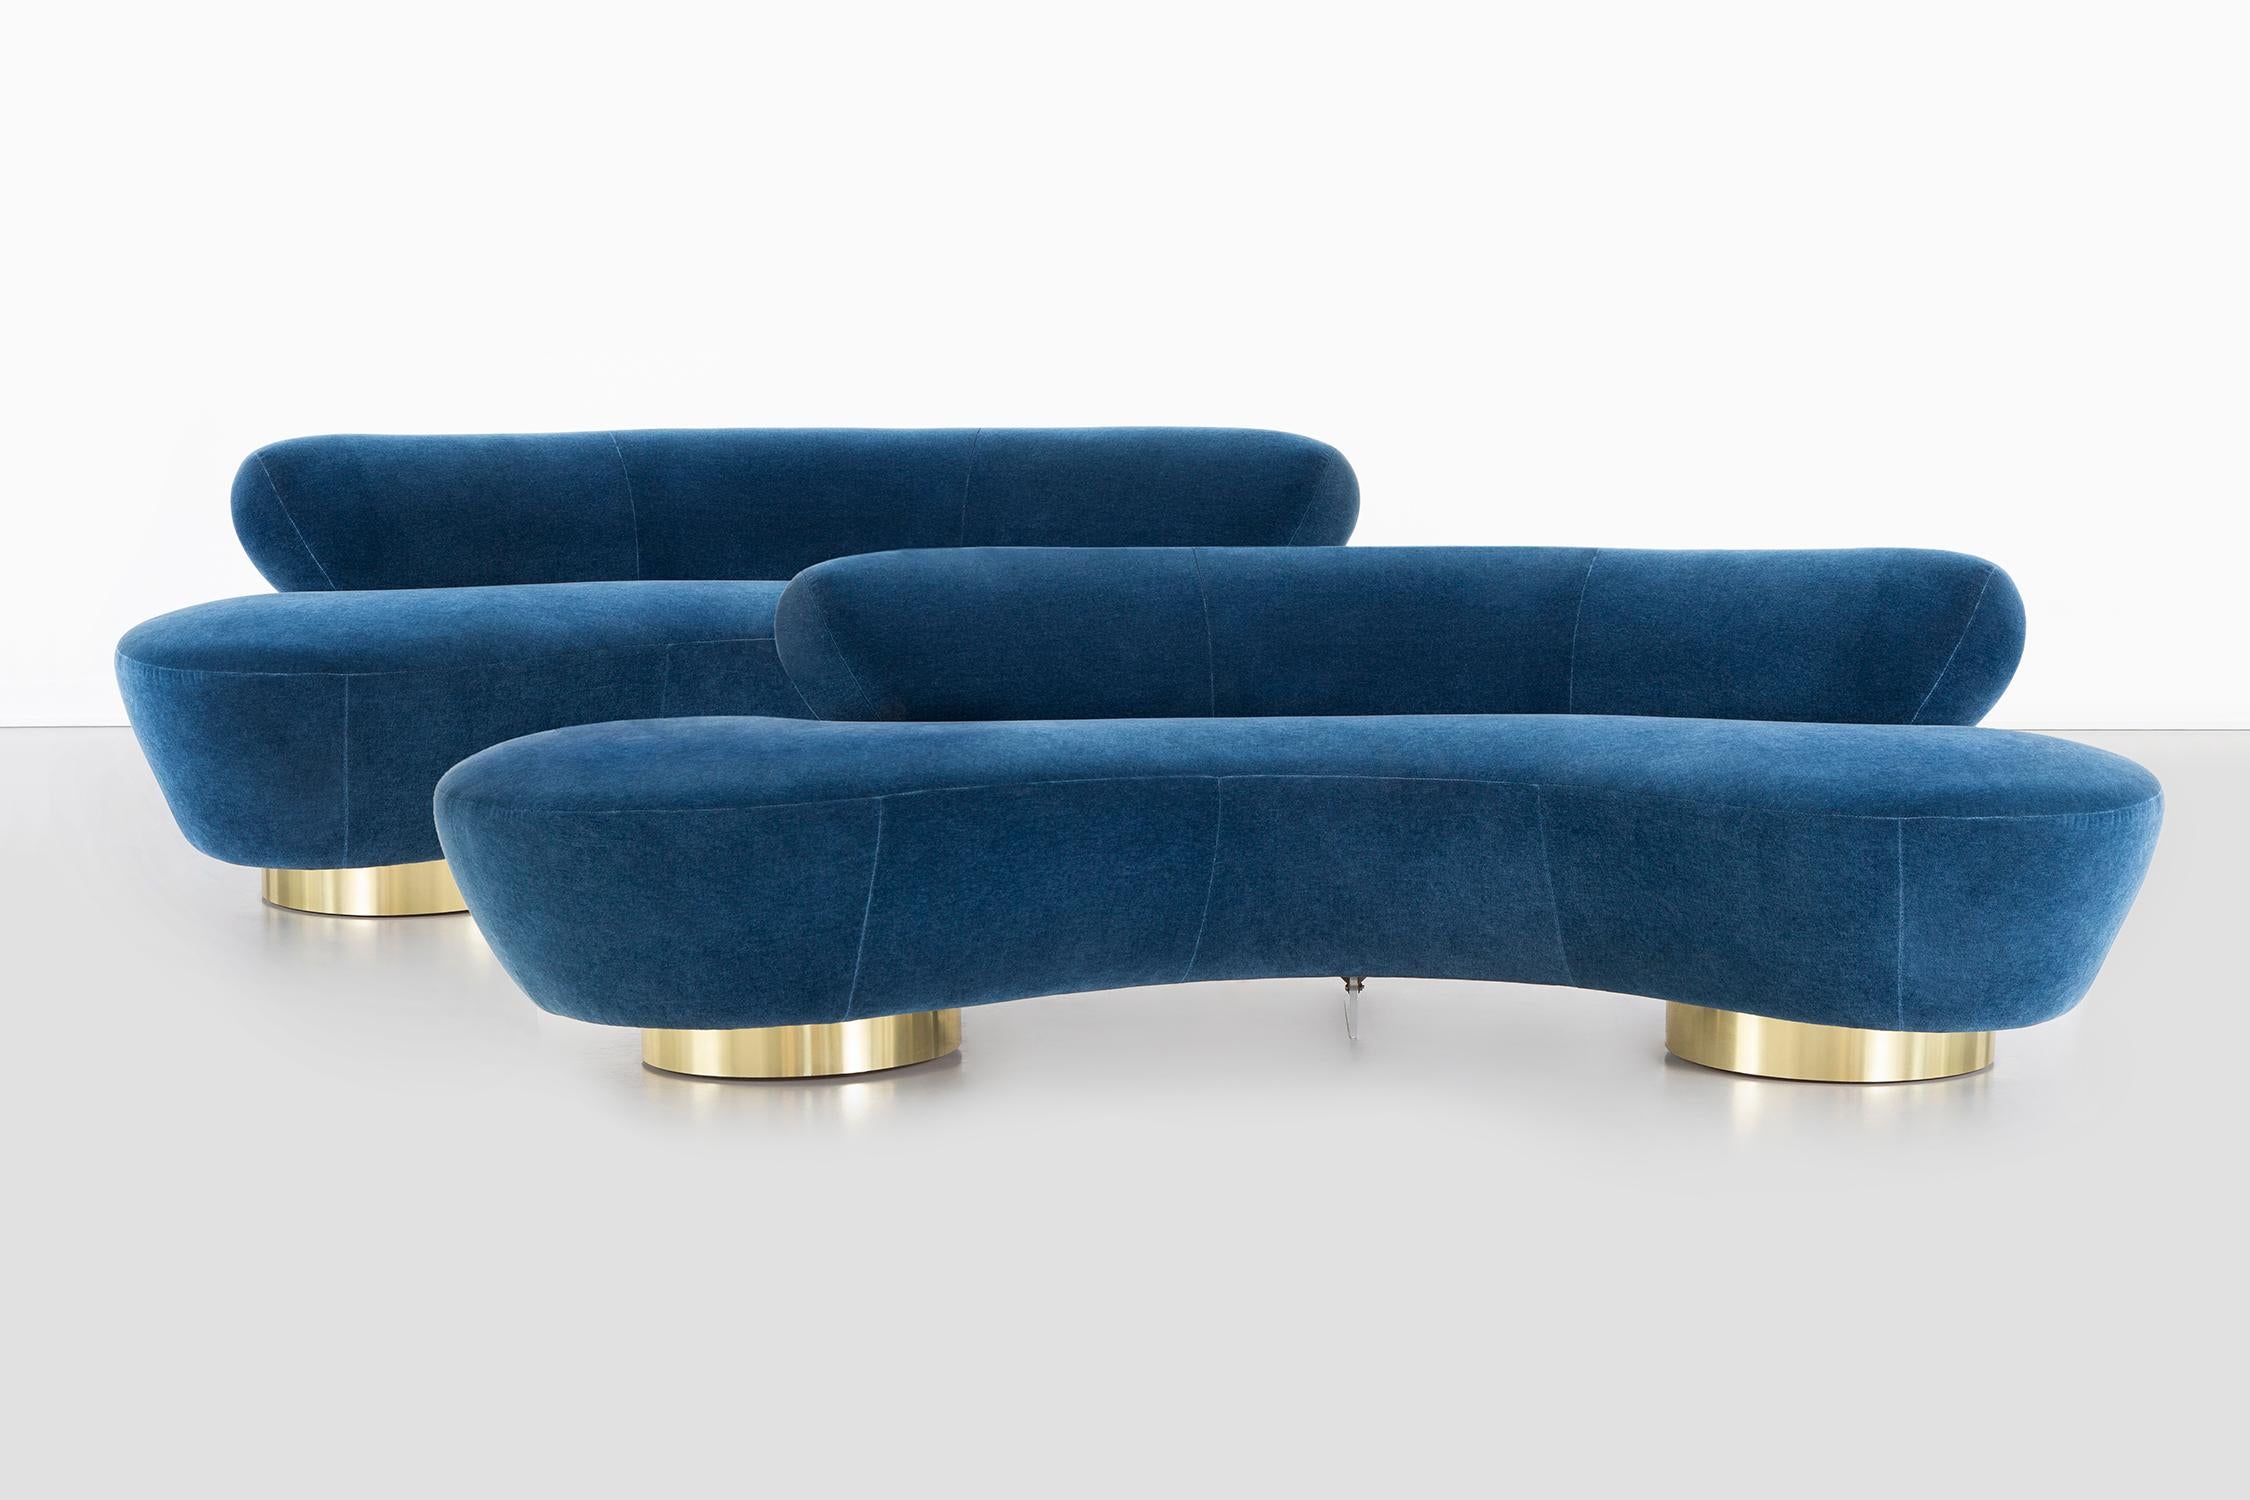 Set of two Cloud sofas

designed by Vladimir Kagan for Directional 

USA, circa 1970s

freshly reupholstered in mohair, brass + Lucite

each sofa measures: 28 ¾” H x 93 ¾” W x 49 ½” D x seat 18 ?” H

fabric sample available upon